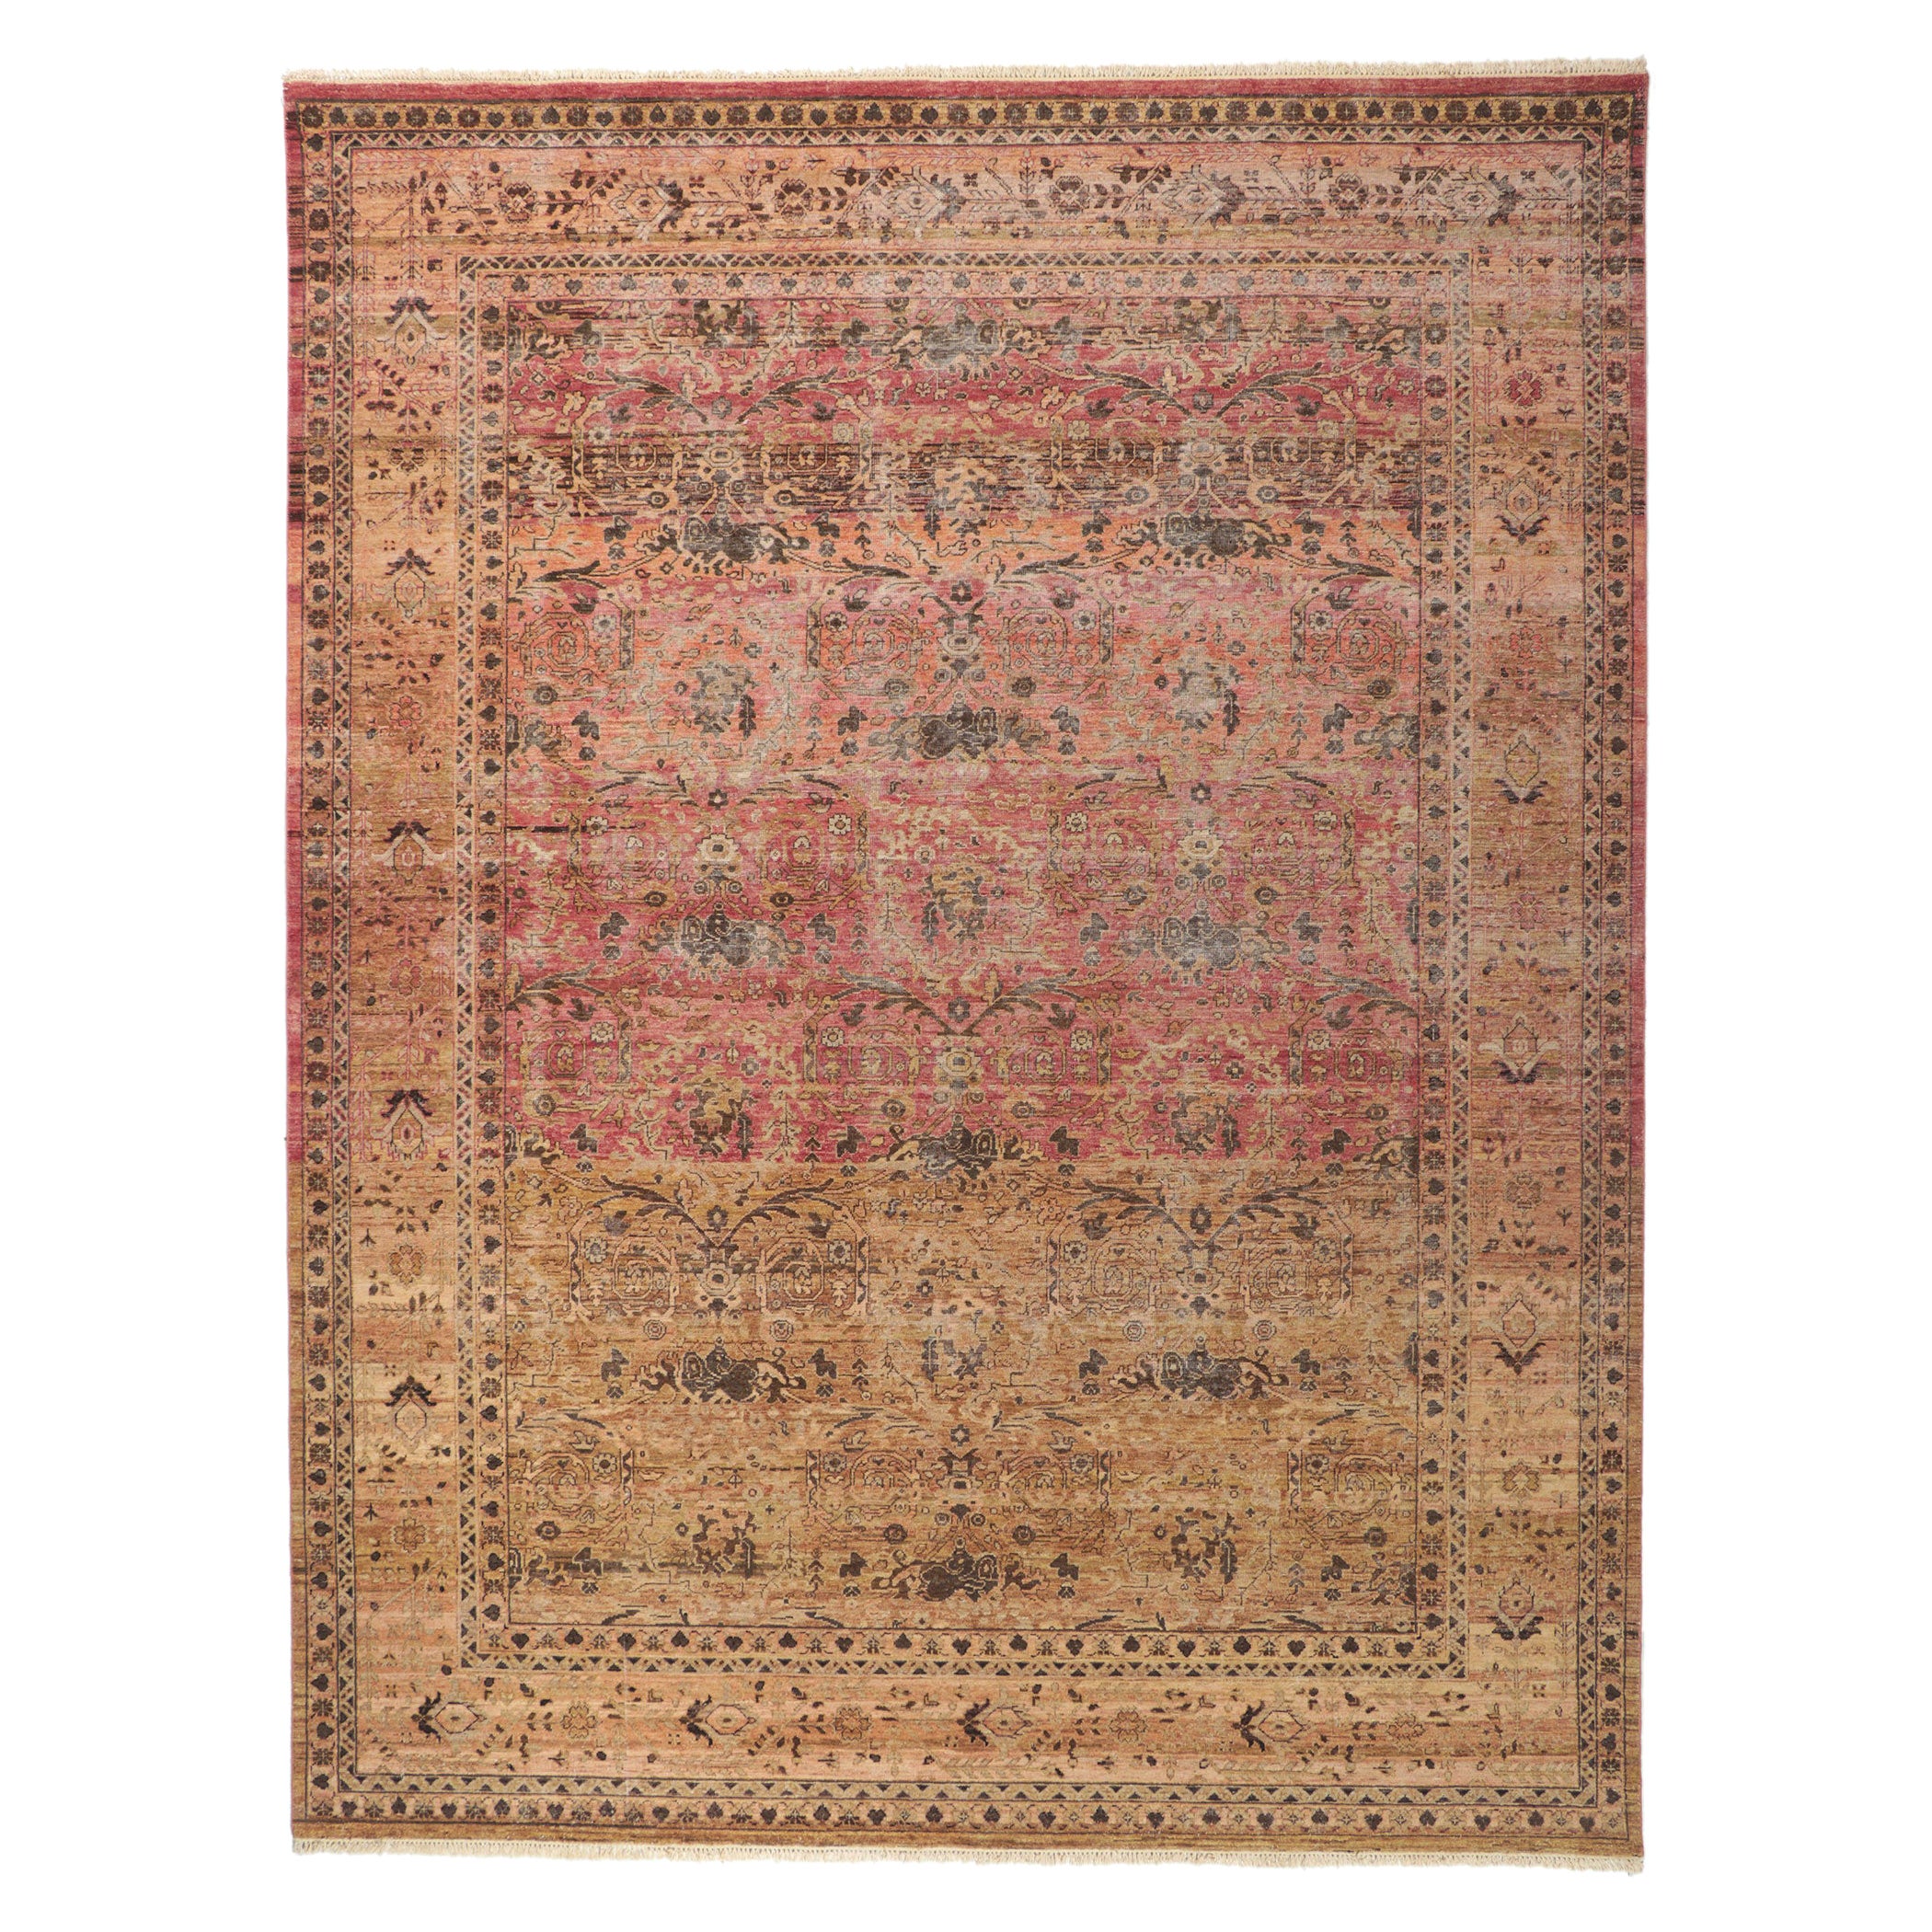 New Vintage-Style Distressed Rug with Rustic Earth-Tone Colors For Sale